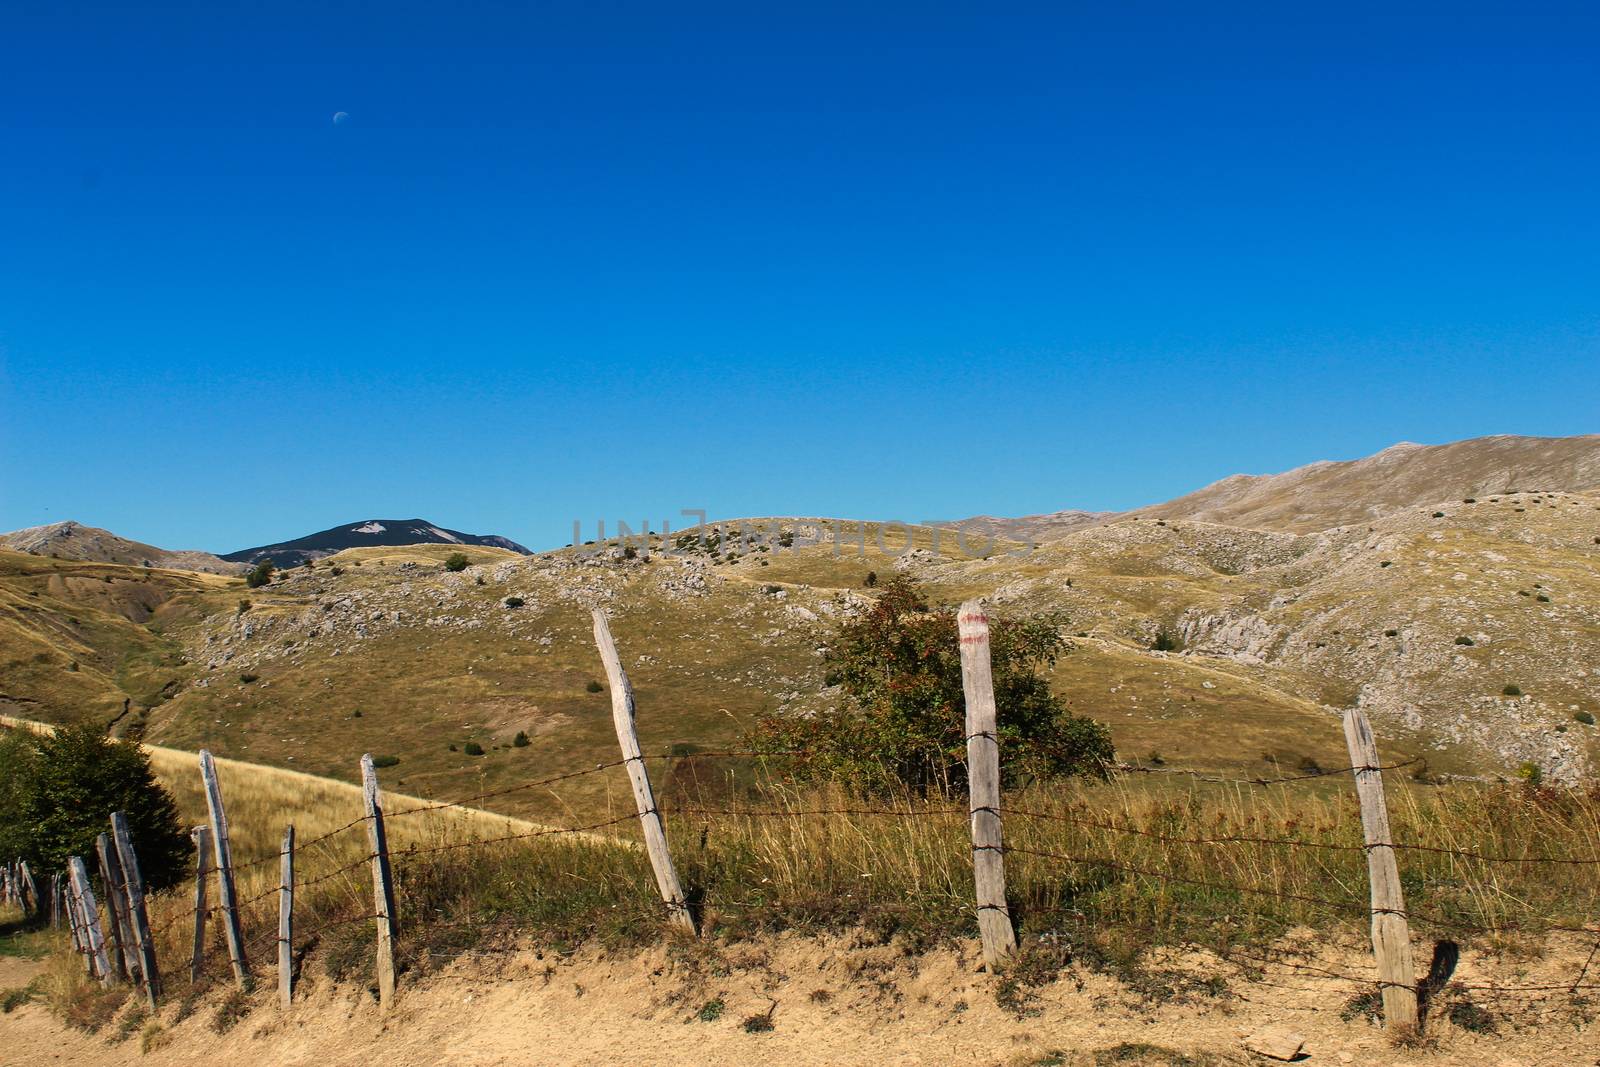 Picture from the old mountain road. Over an old wire fence a mountain hill without vegetation. Autumn view of Bjelasnica mountain, Bosnia and Herzegovina.